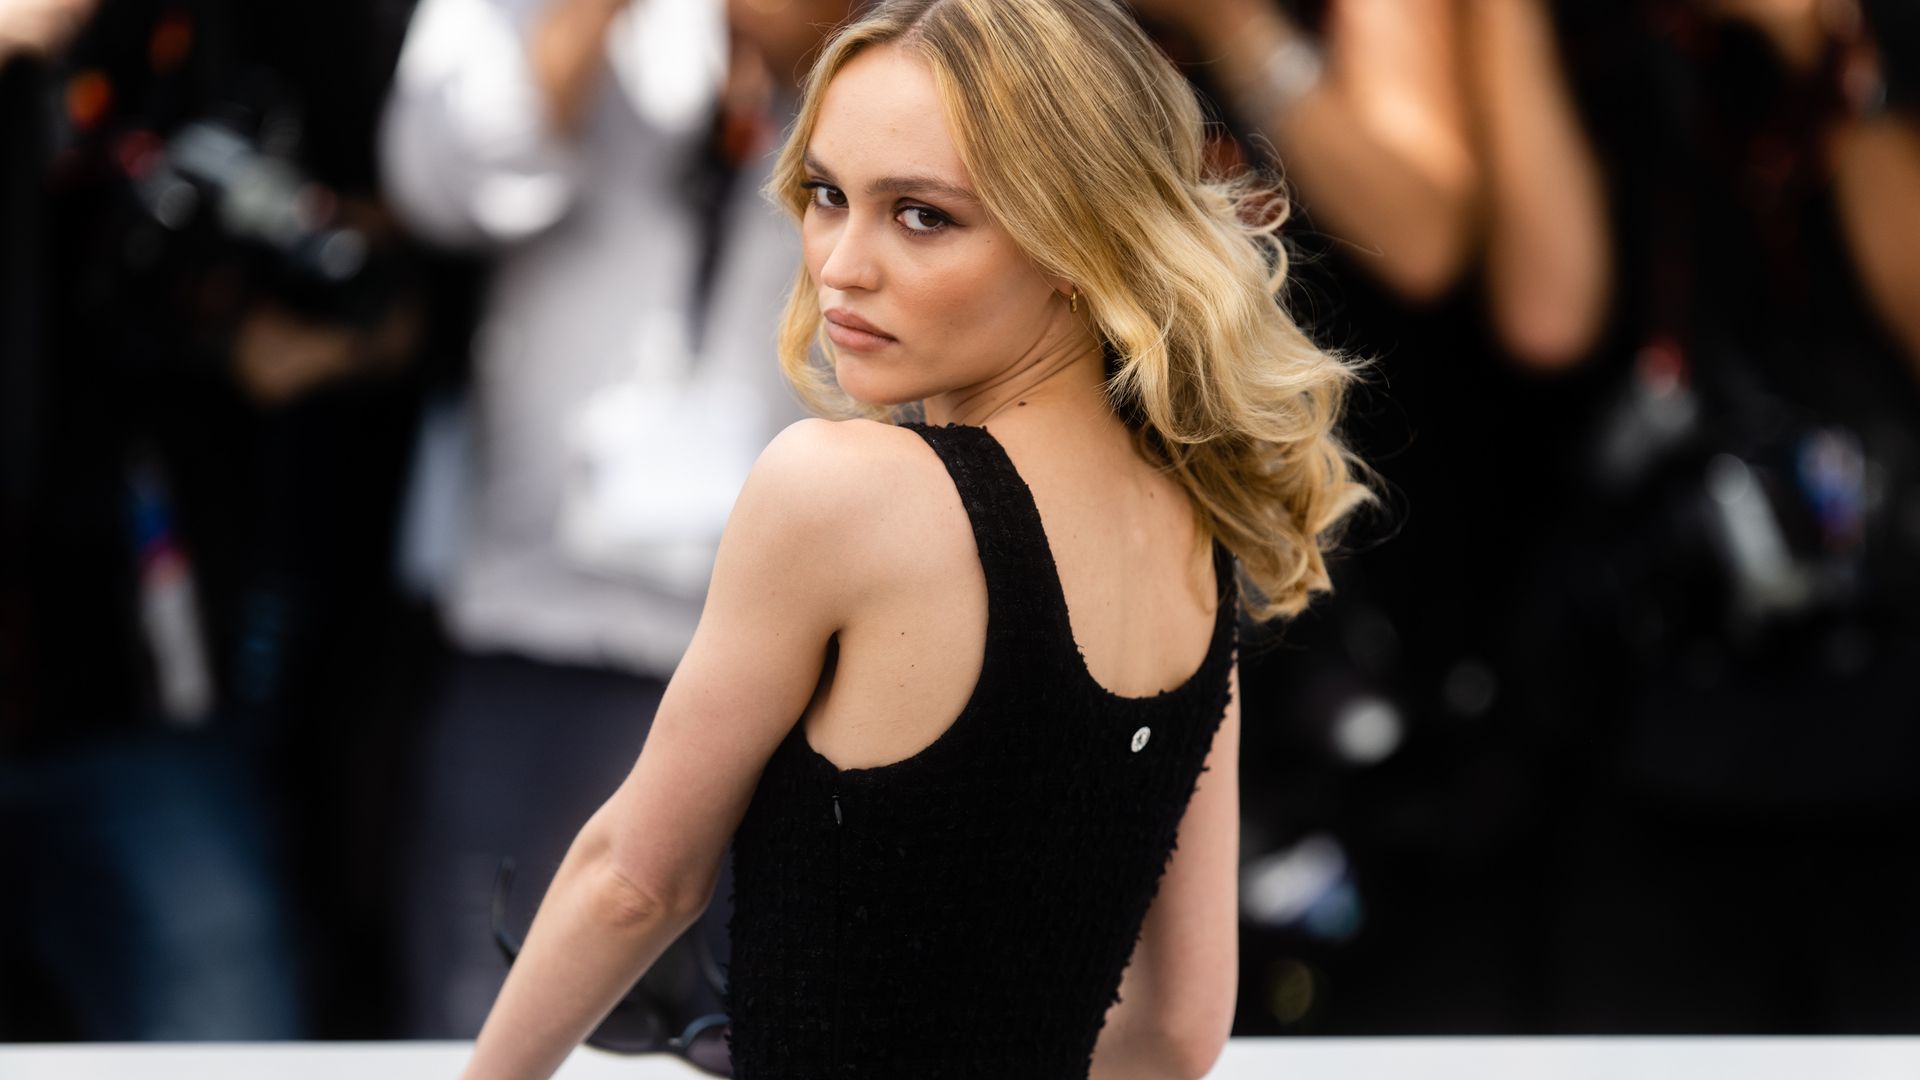 Lily-Rose Depp soft launches new relationship as she styles out ripped jeans